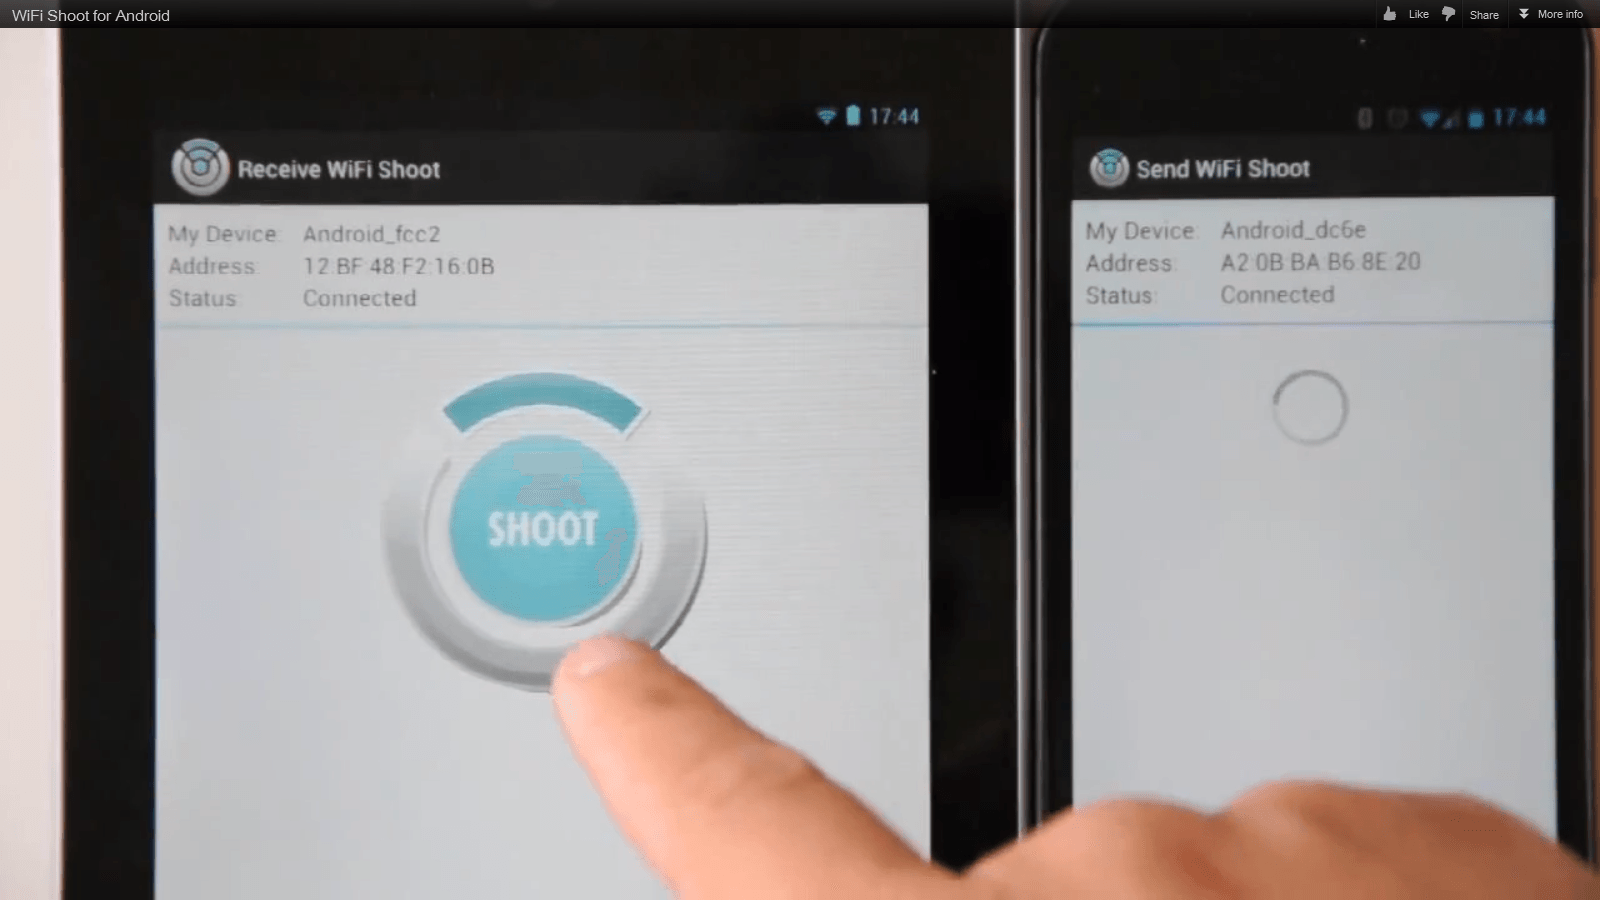 WiFiShoot compartir archivos android